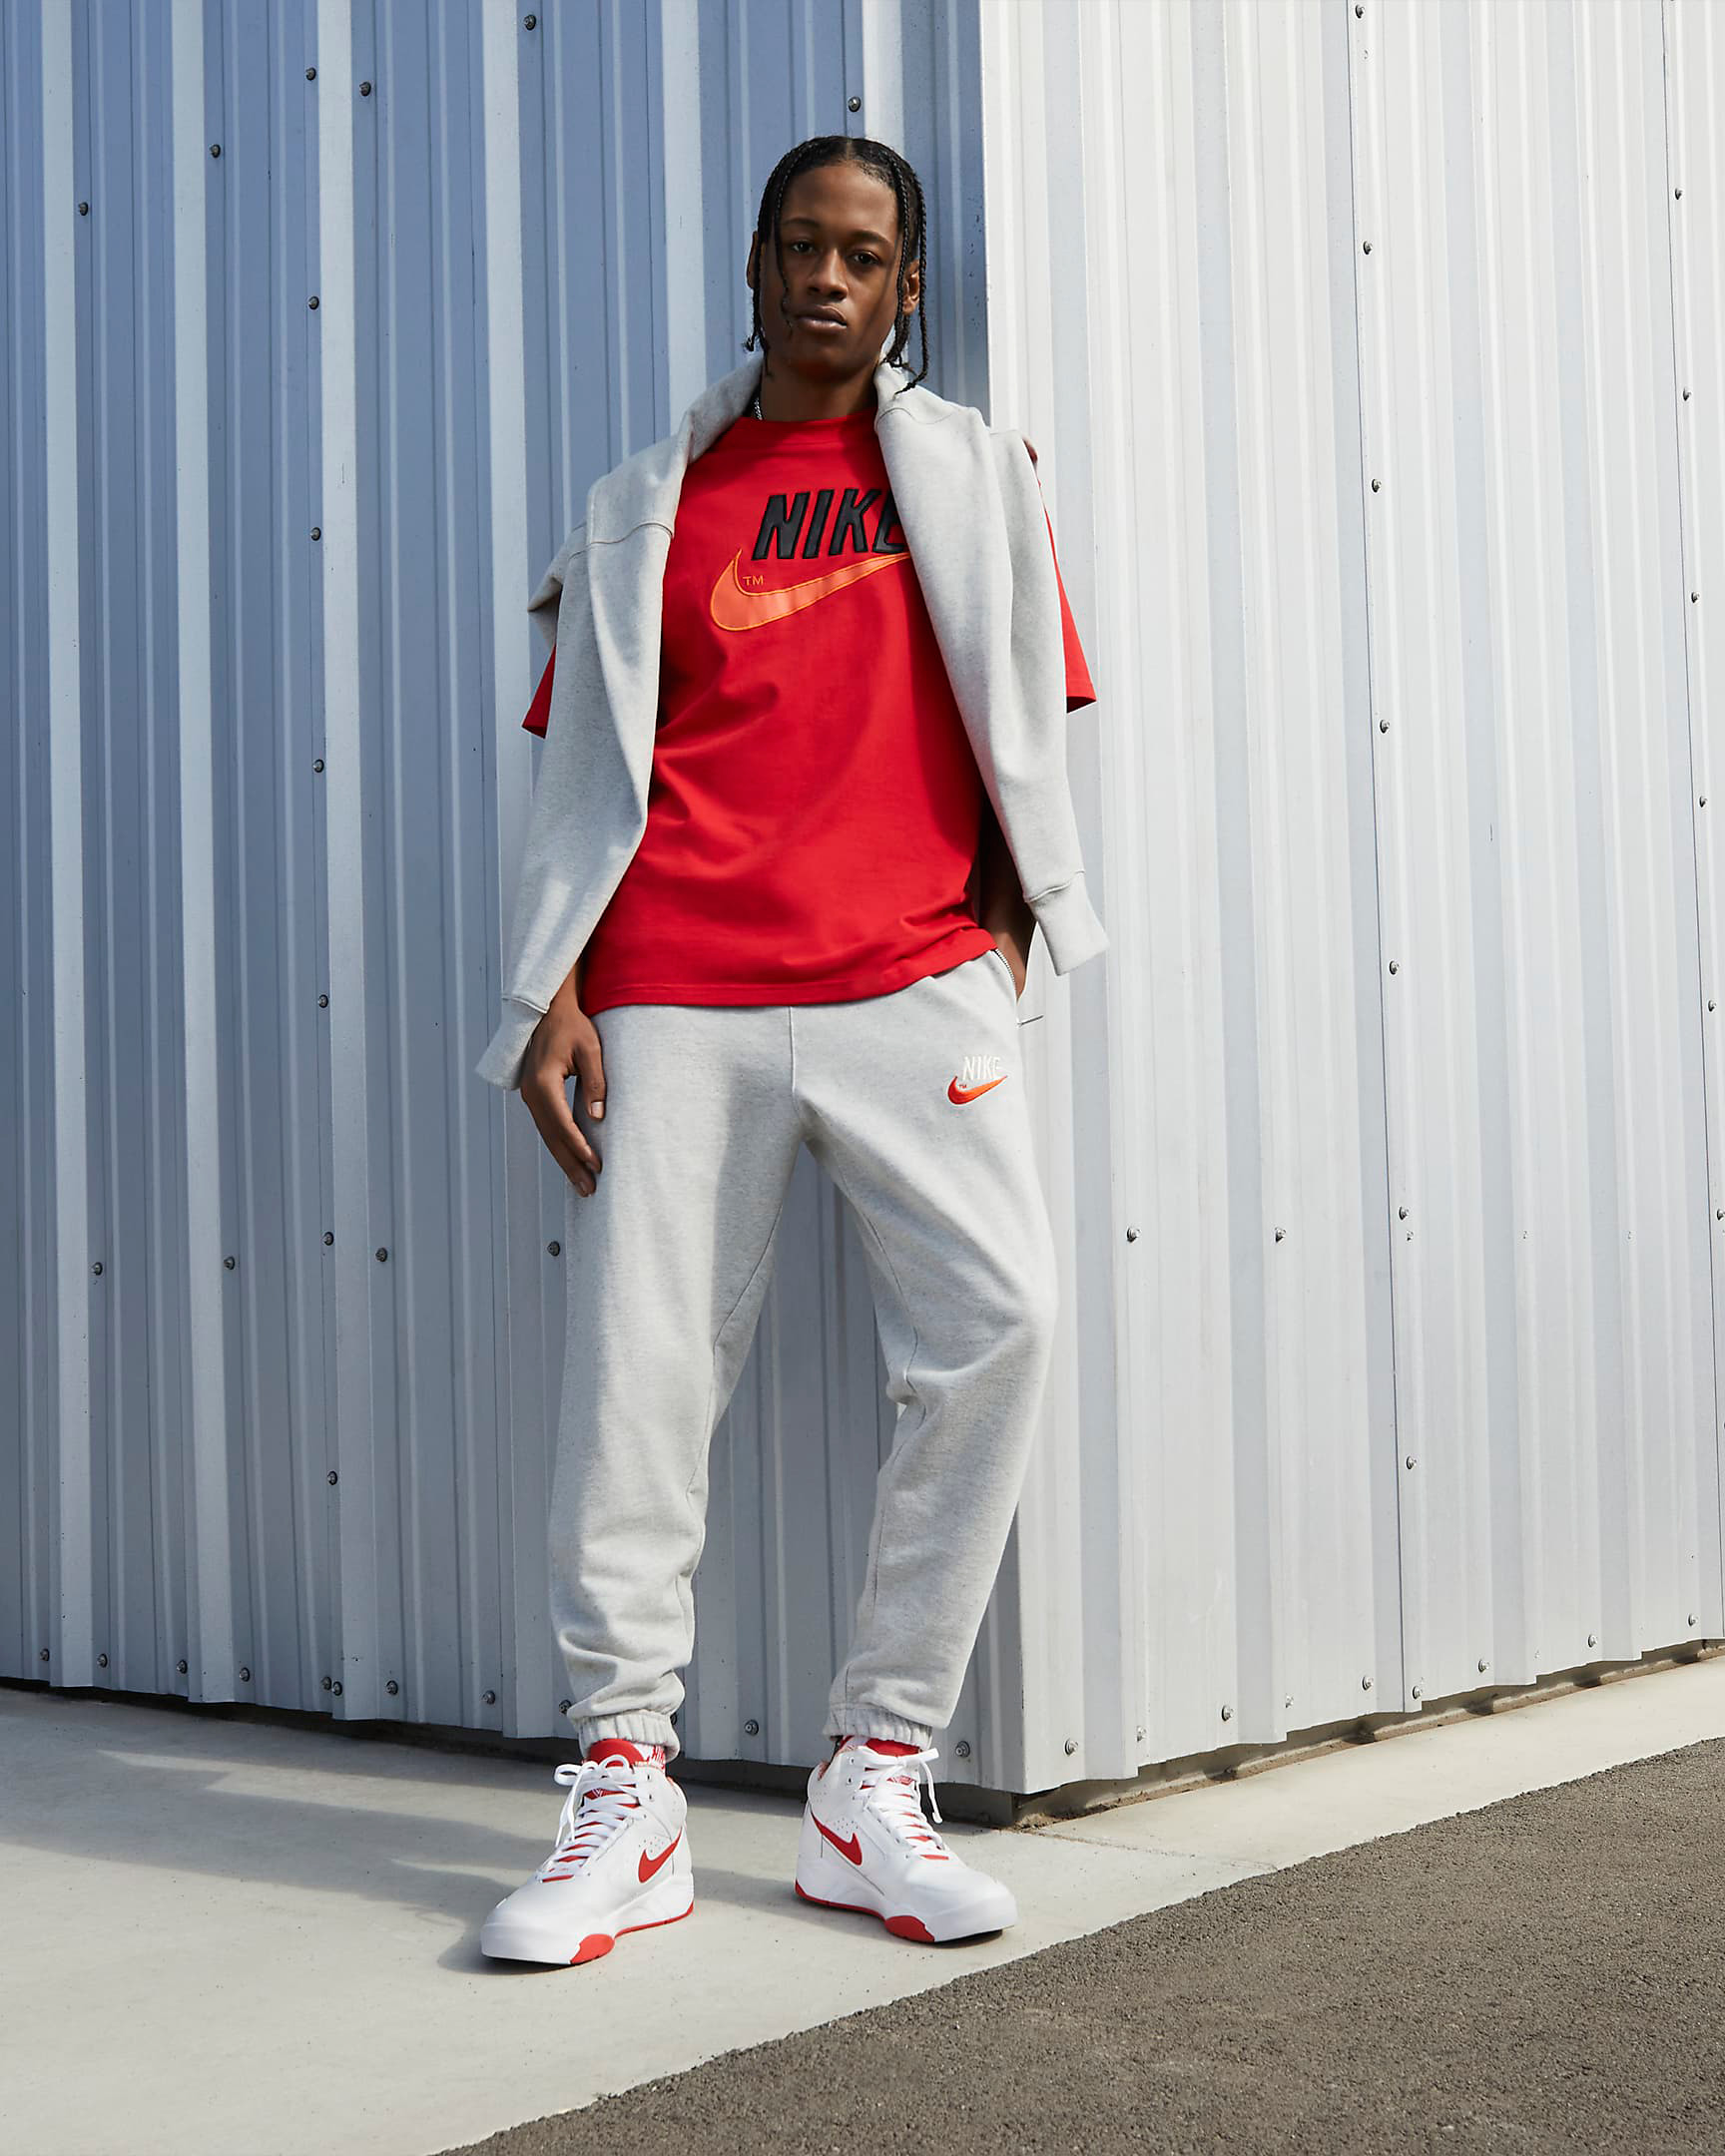 nike-air-flight-lite-mid-scottie-pippen-white-university-red-outfit